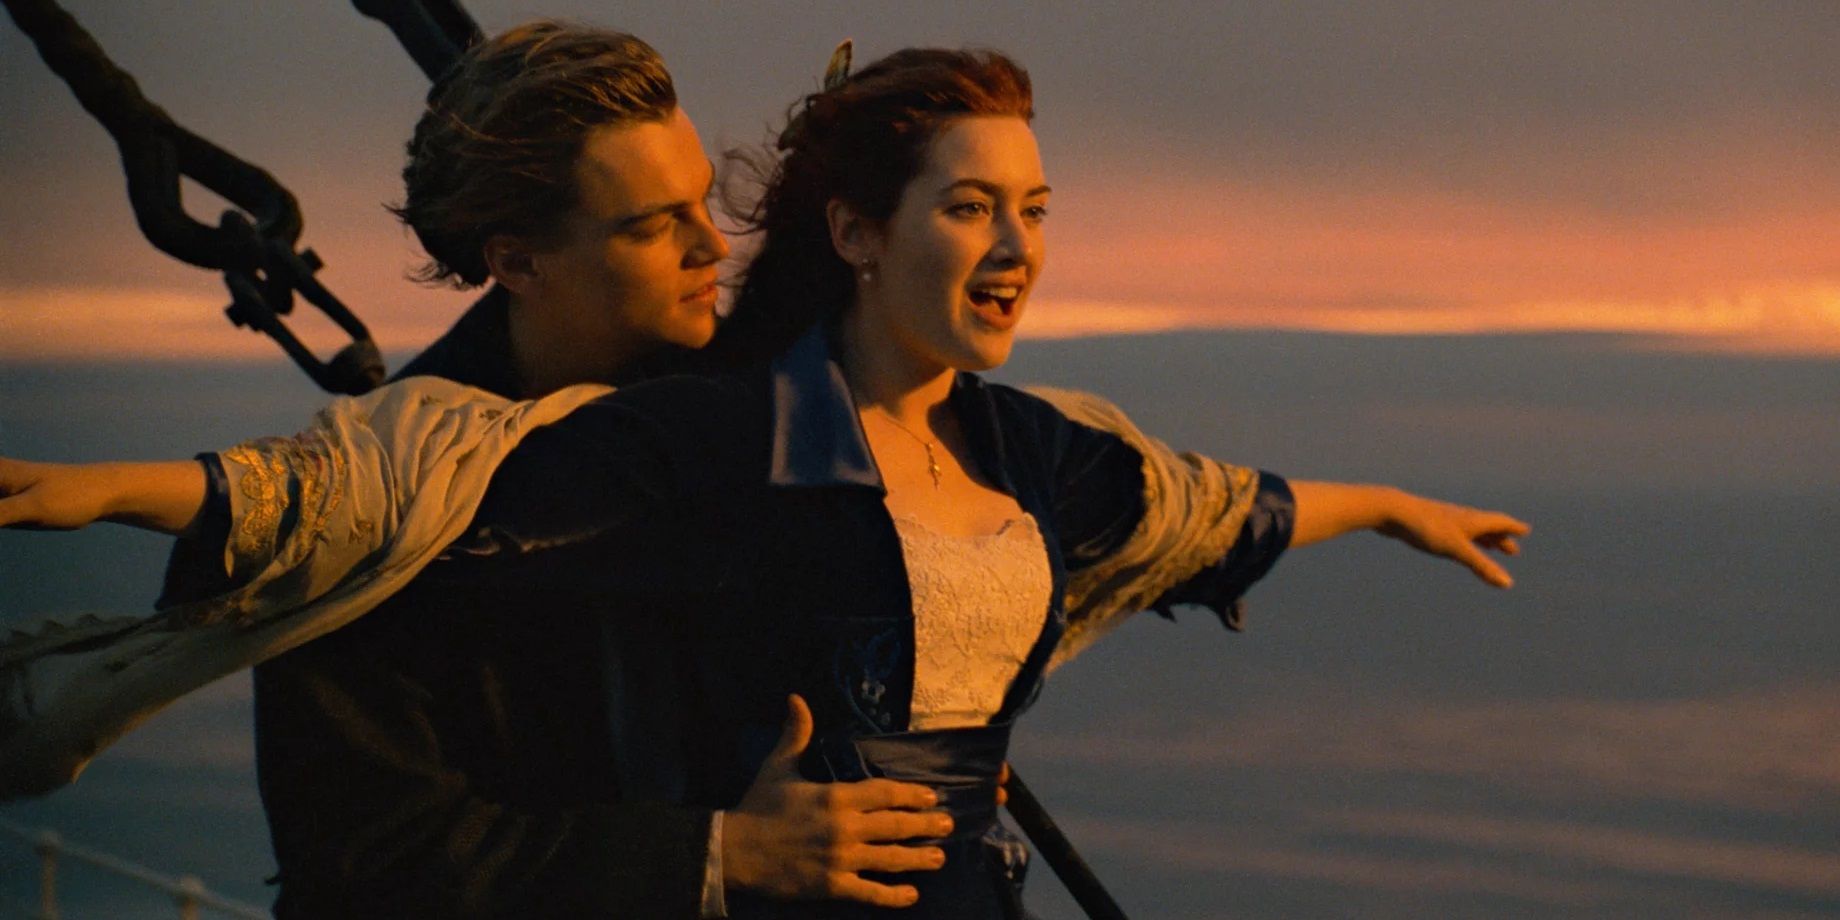 Jack holds Rose at the bow of the ship in Titanic